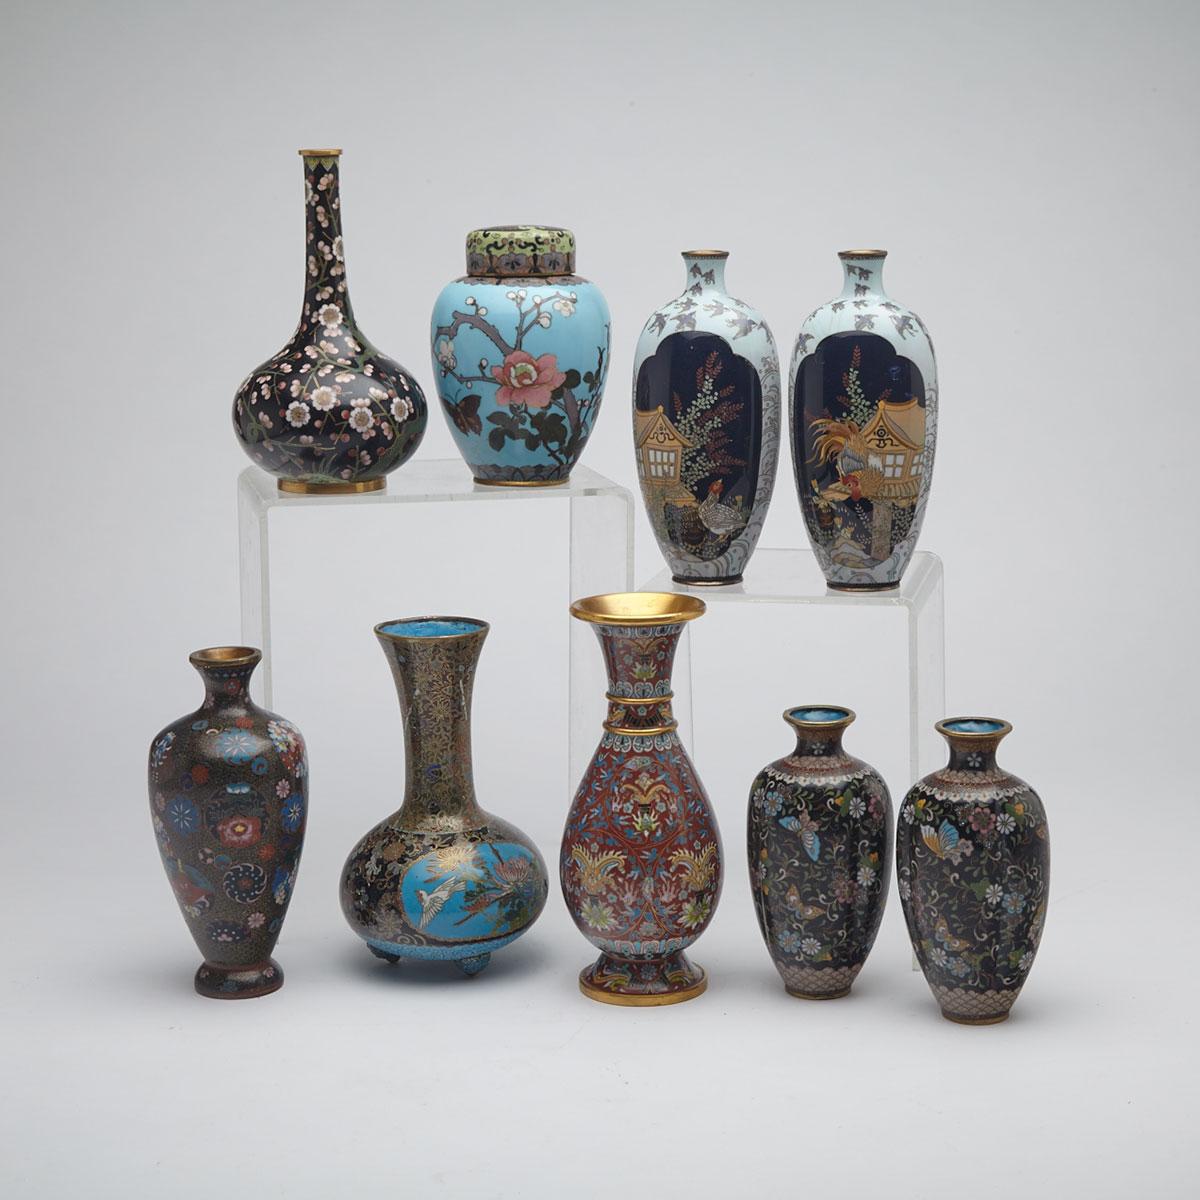 Group of Nine Cloisonné Enamel Vessels, China and Japan, First-Half 20th Century